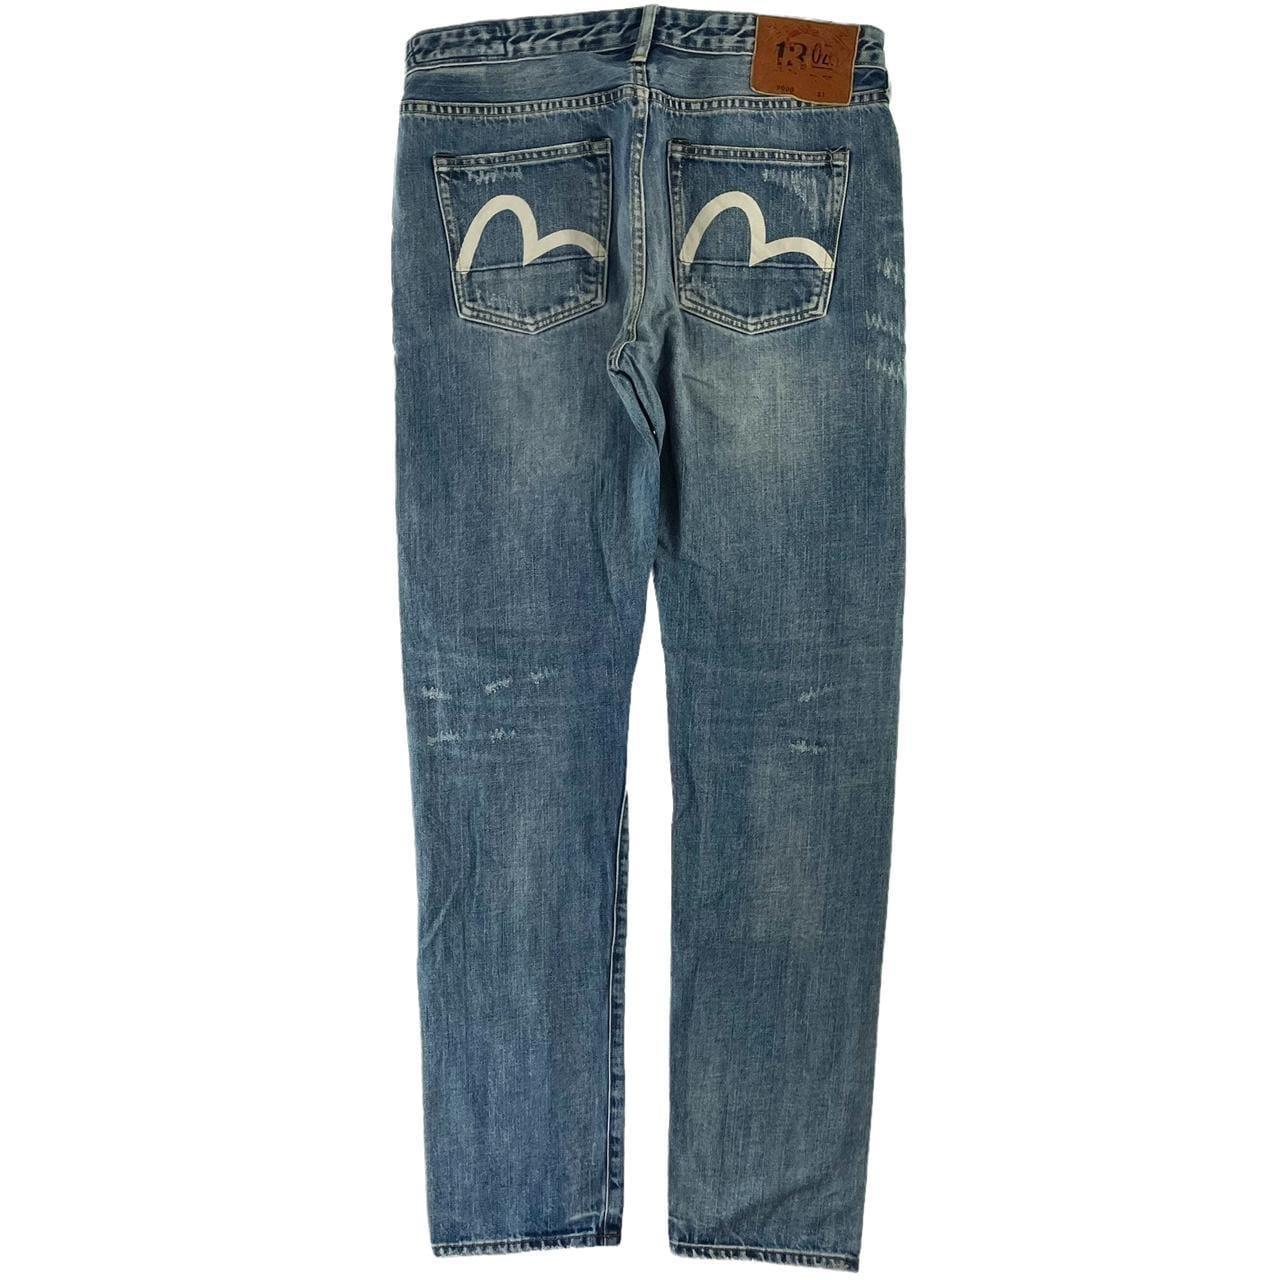 Evisu double gull Japanese denim jeans trousers W31 - Known Source